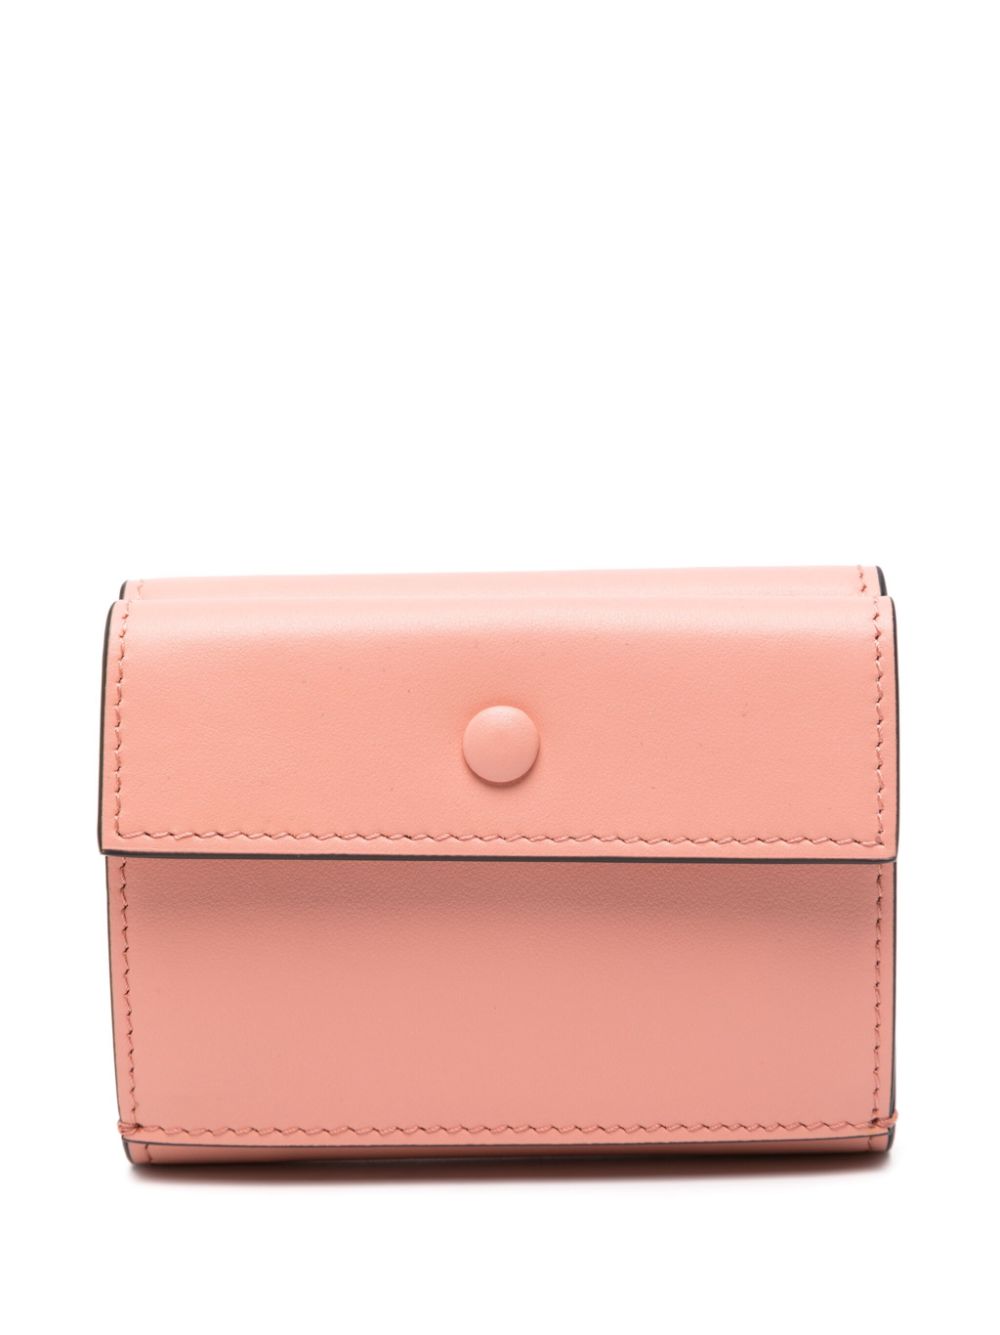 Brand New KENZO Trifold Wallet In Pink